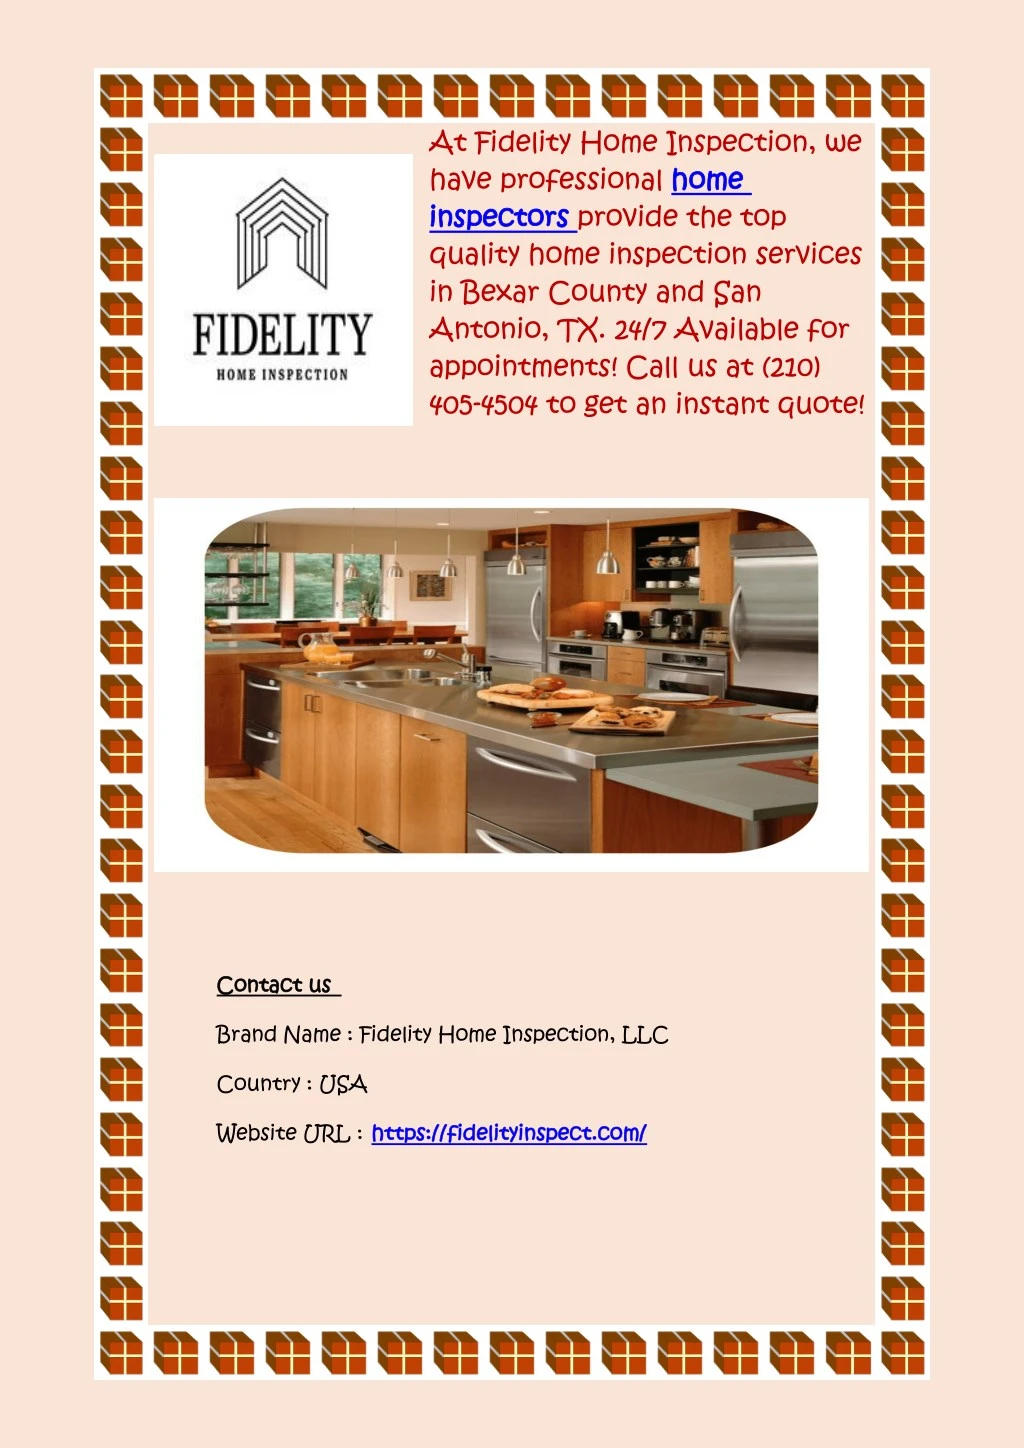 at fidelity home inspection we have professional